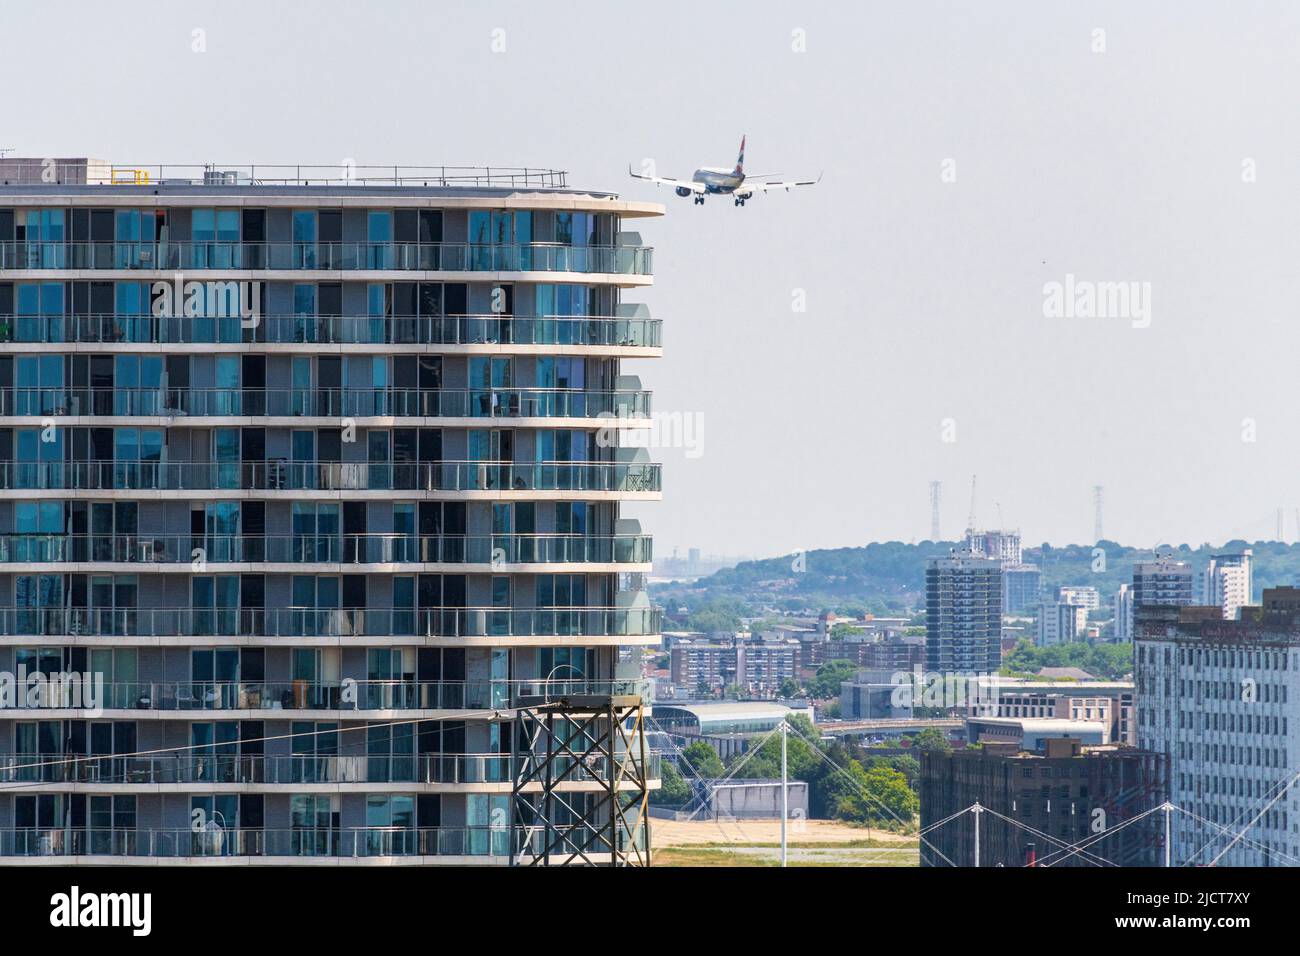 A British Airways Jet comes into land at London City Airport. Stock Photo